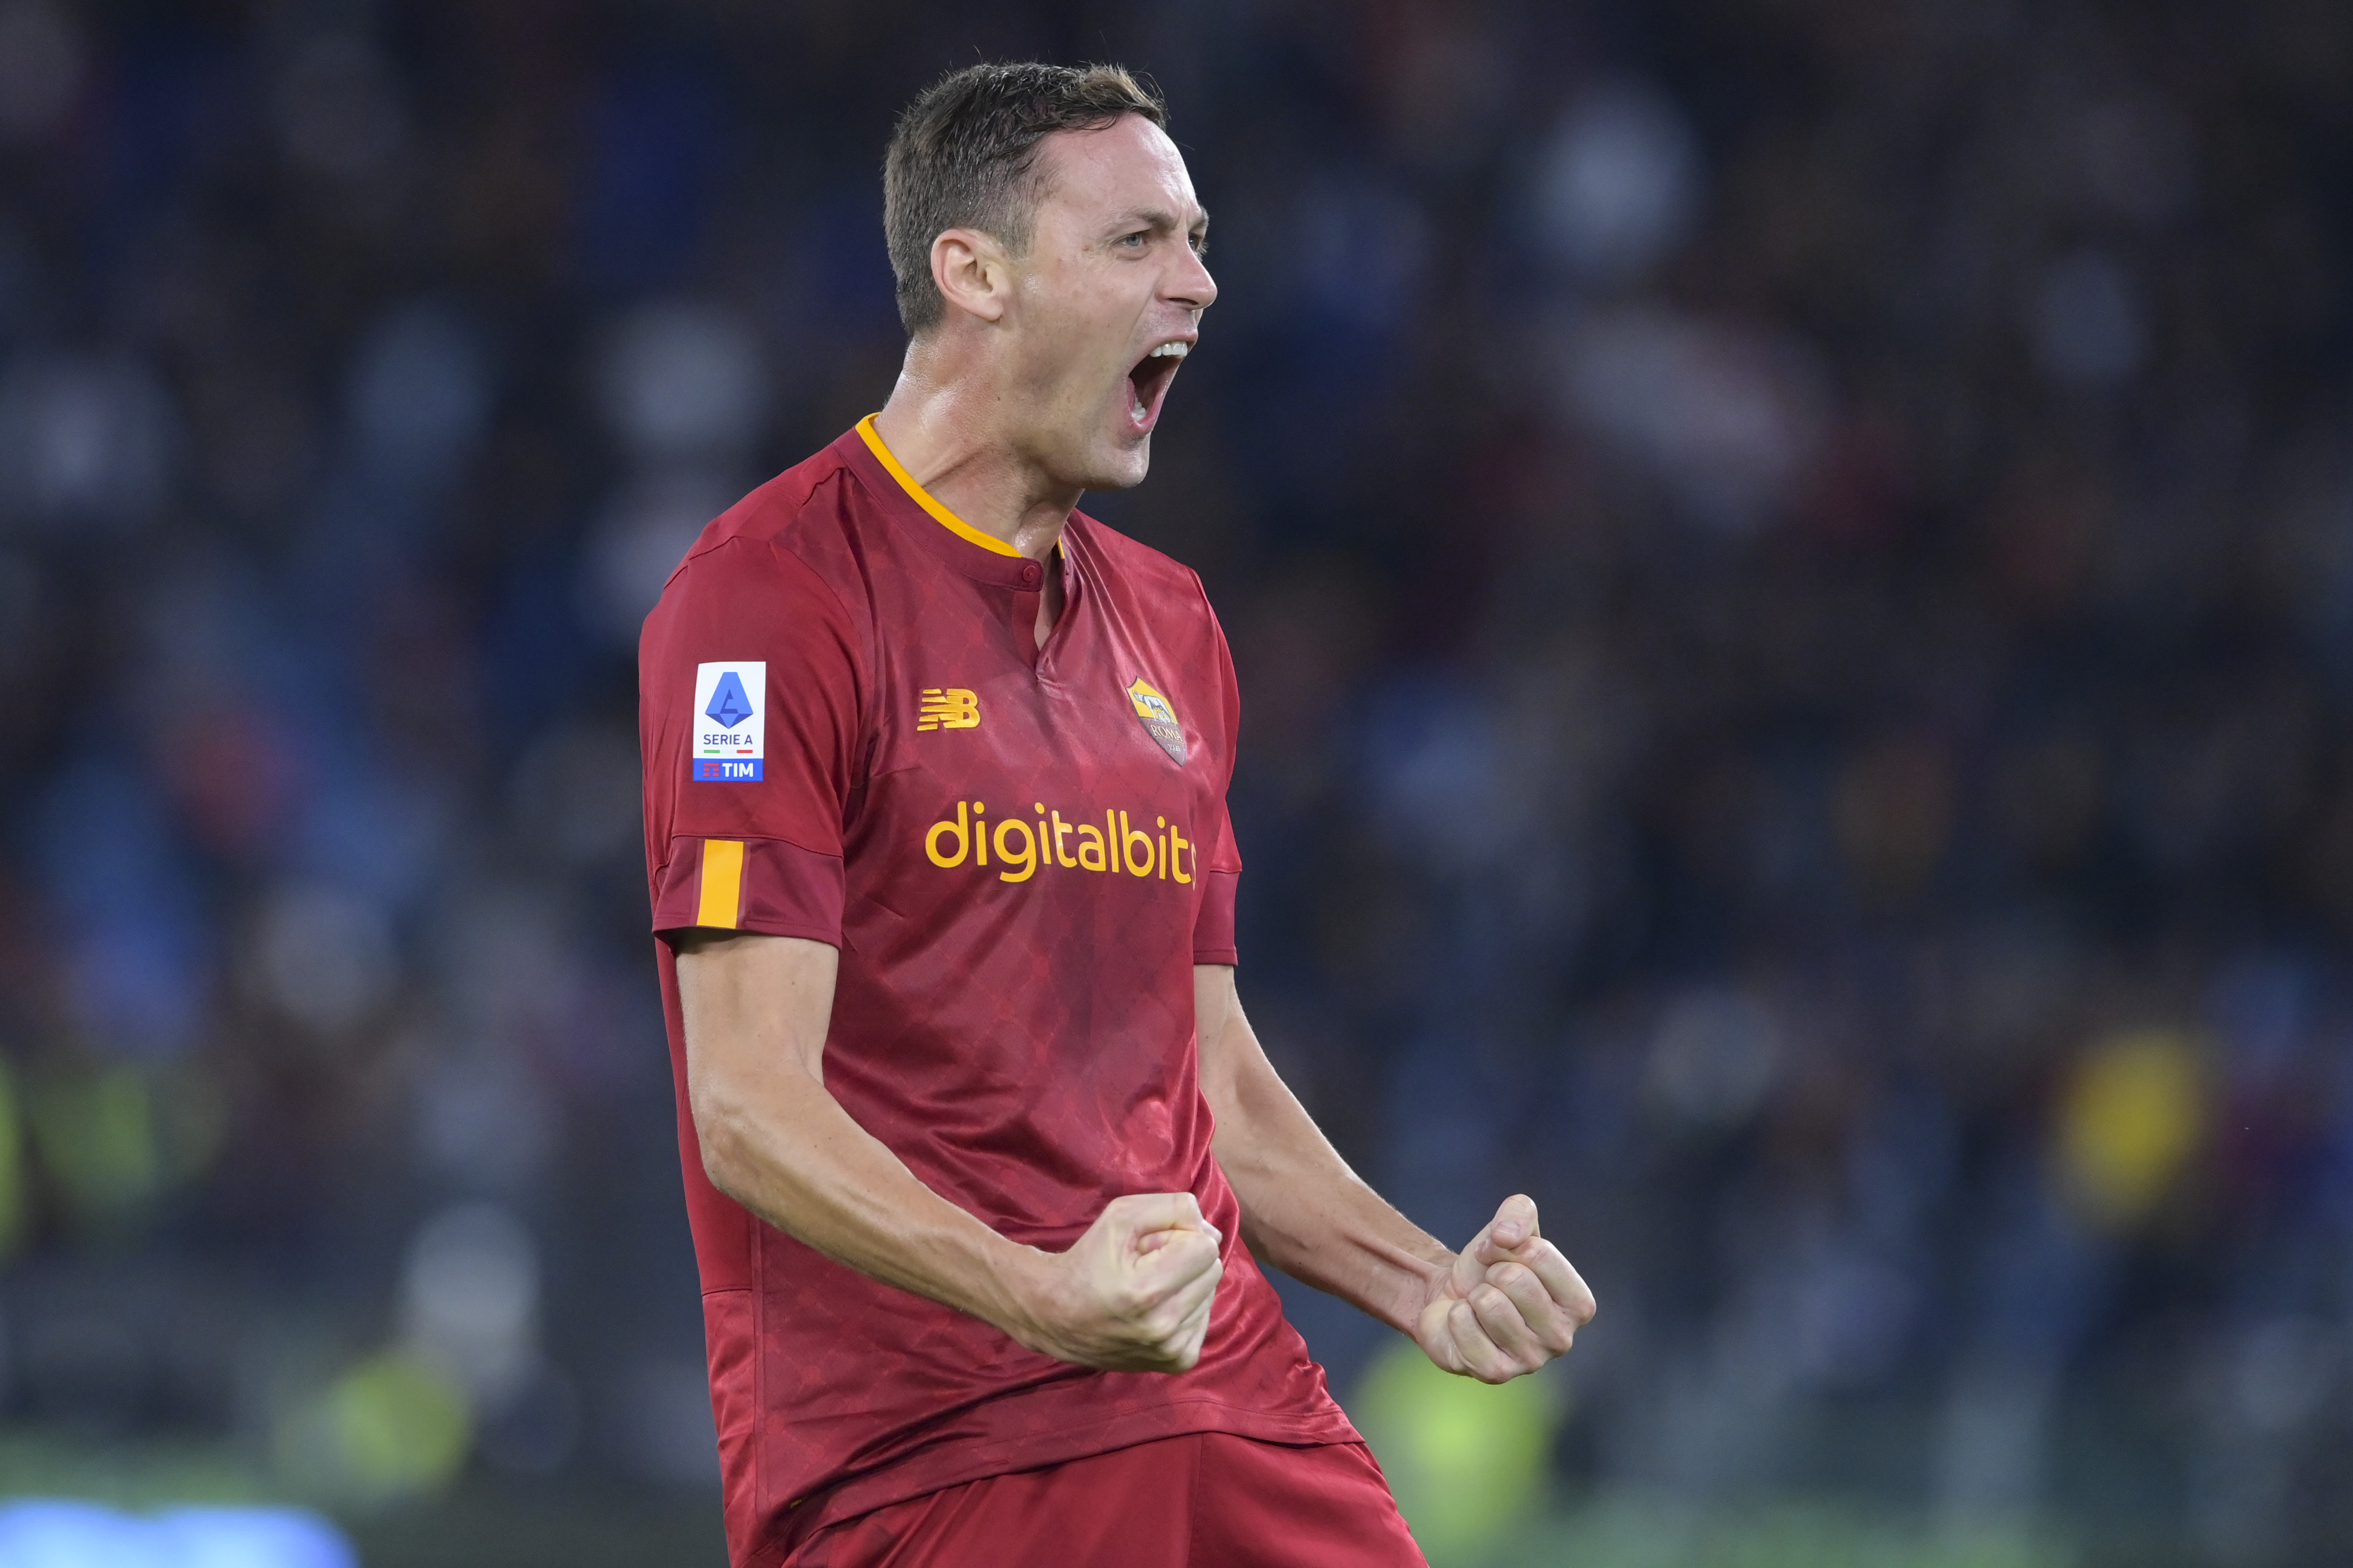 Matic celebration after the goal against Torino